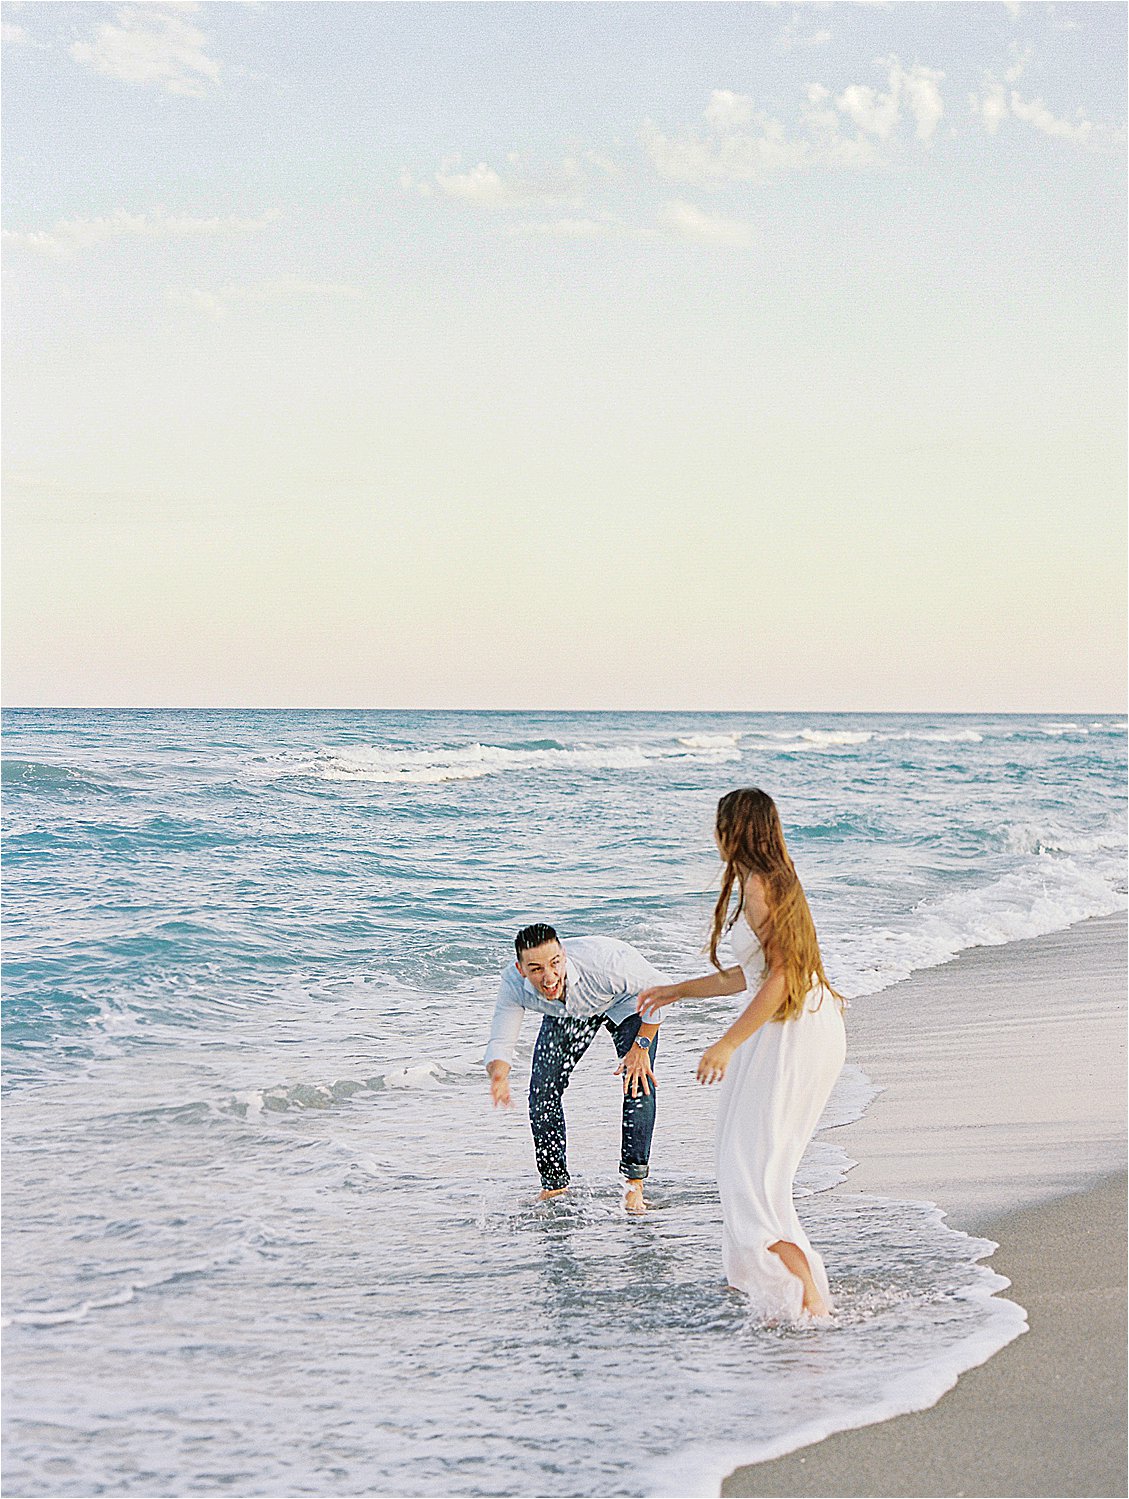 Fun Palm Beach Engagement Session at Sunset with Destination Film Wedding Photographer, Renee Hollingshead